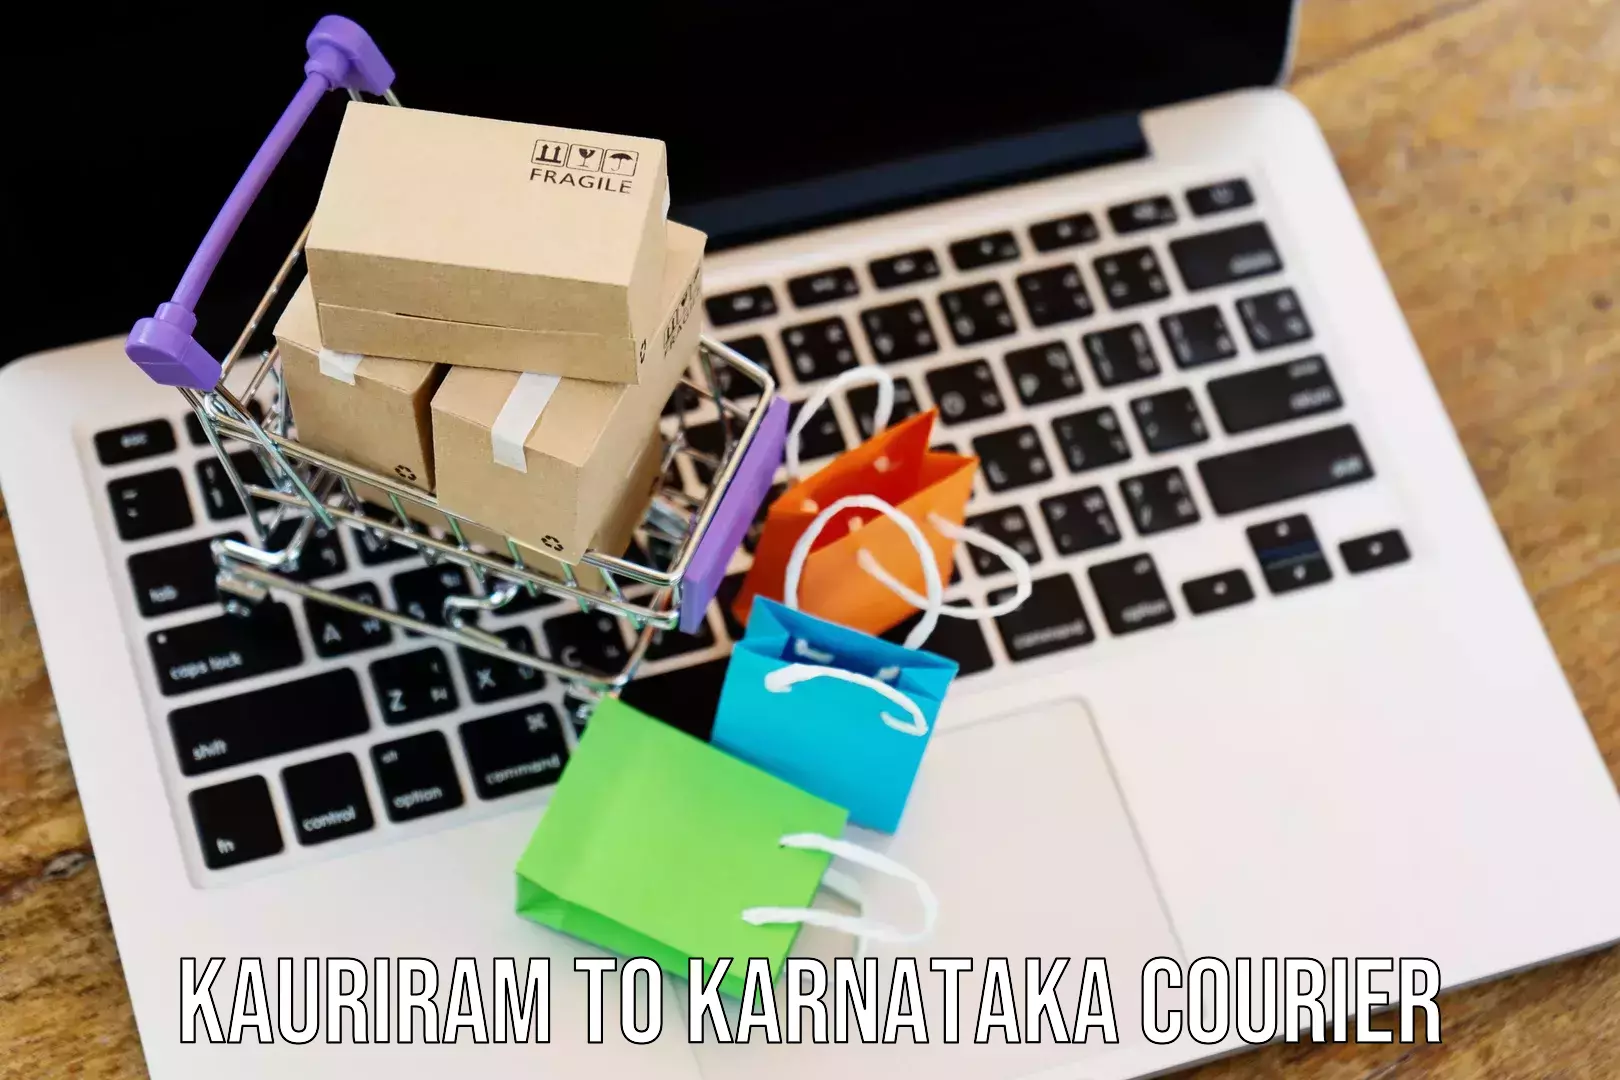 Customer-oriented courier services Kauriram to Mangalore Port